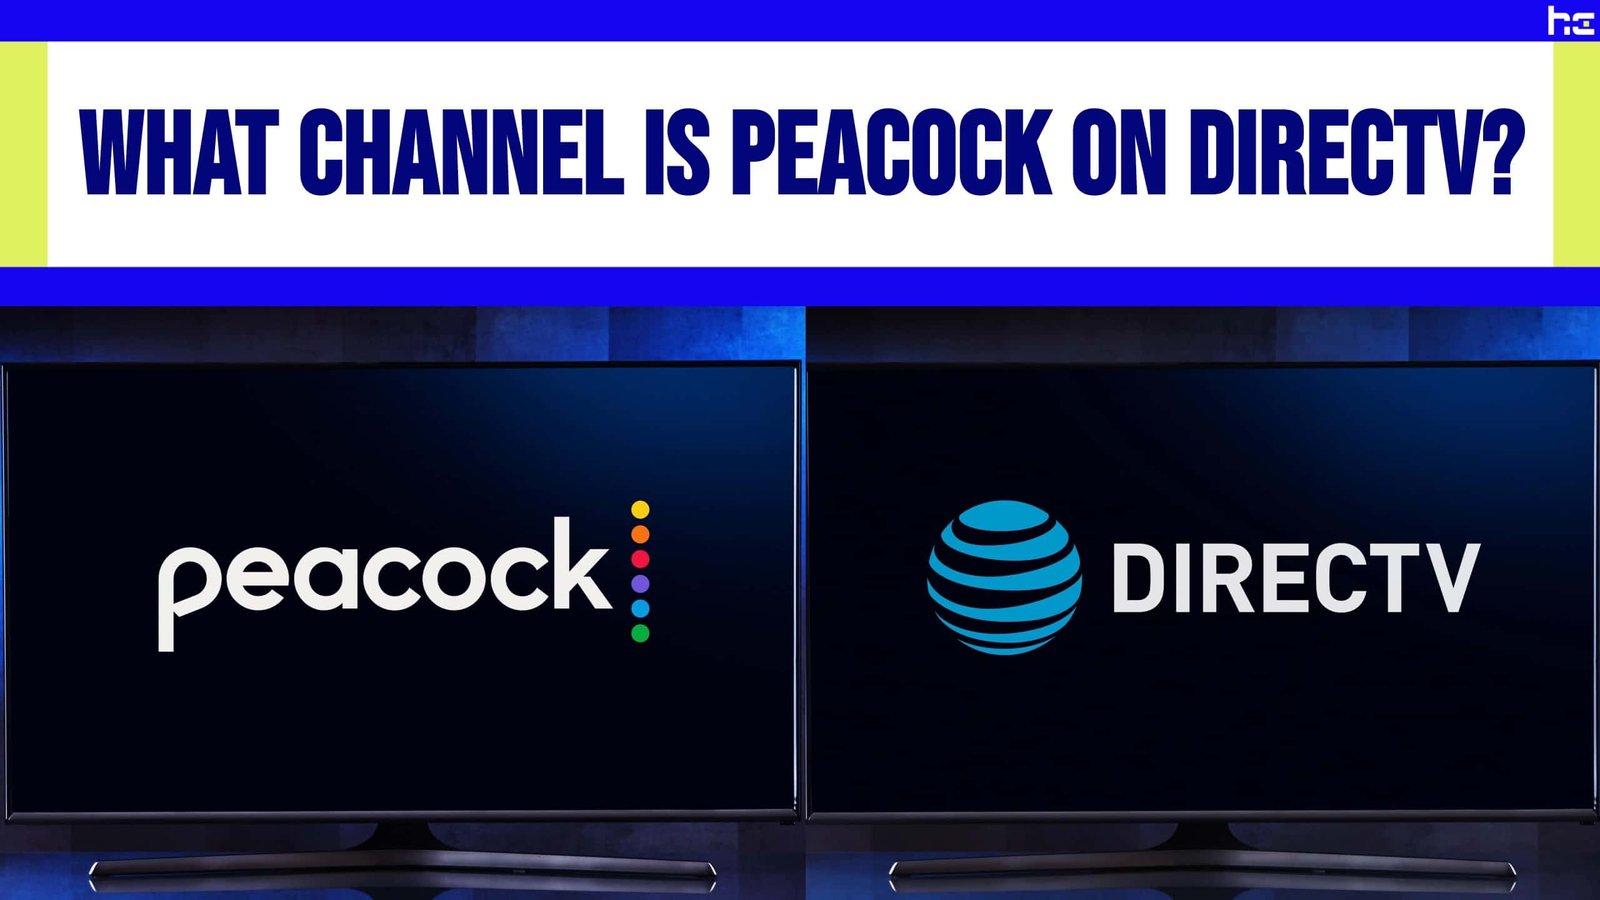 What Channel is Peacock on Directv?